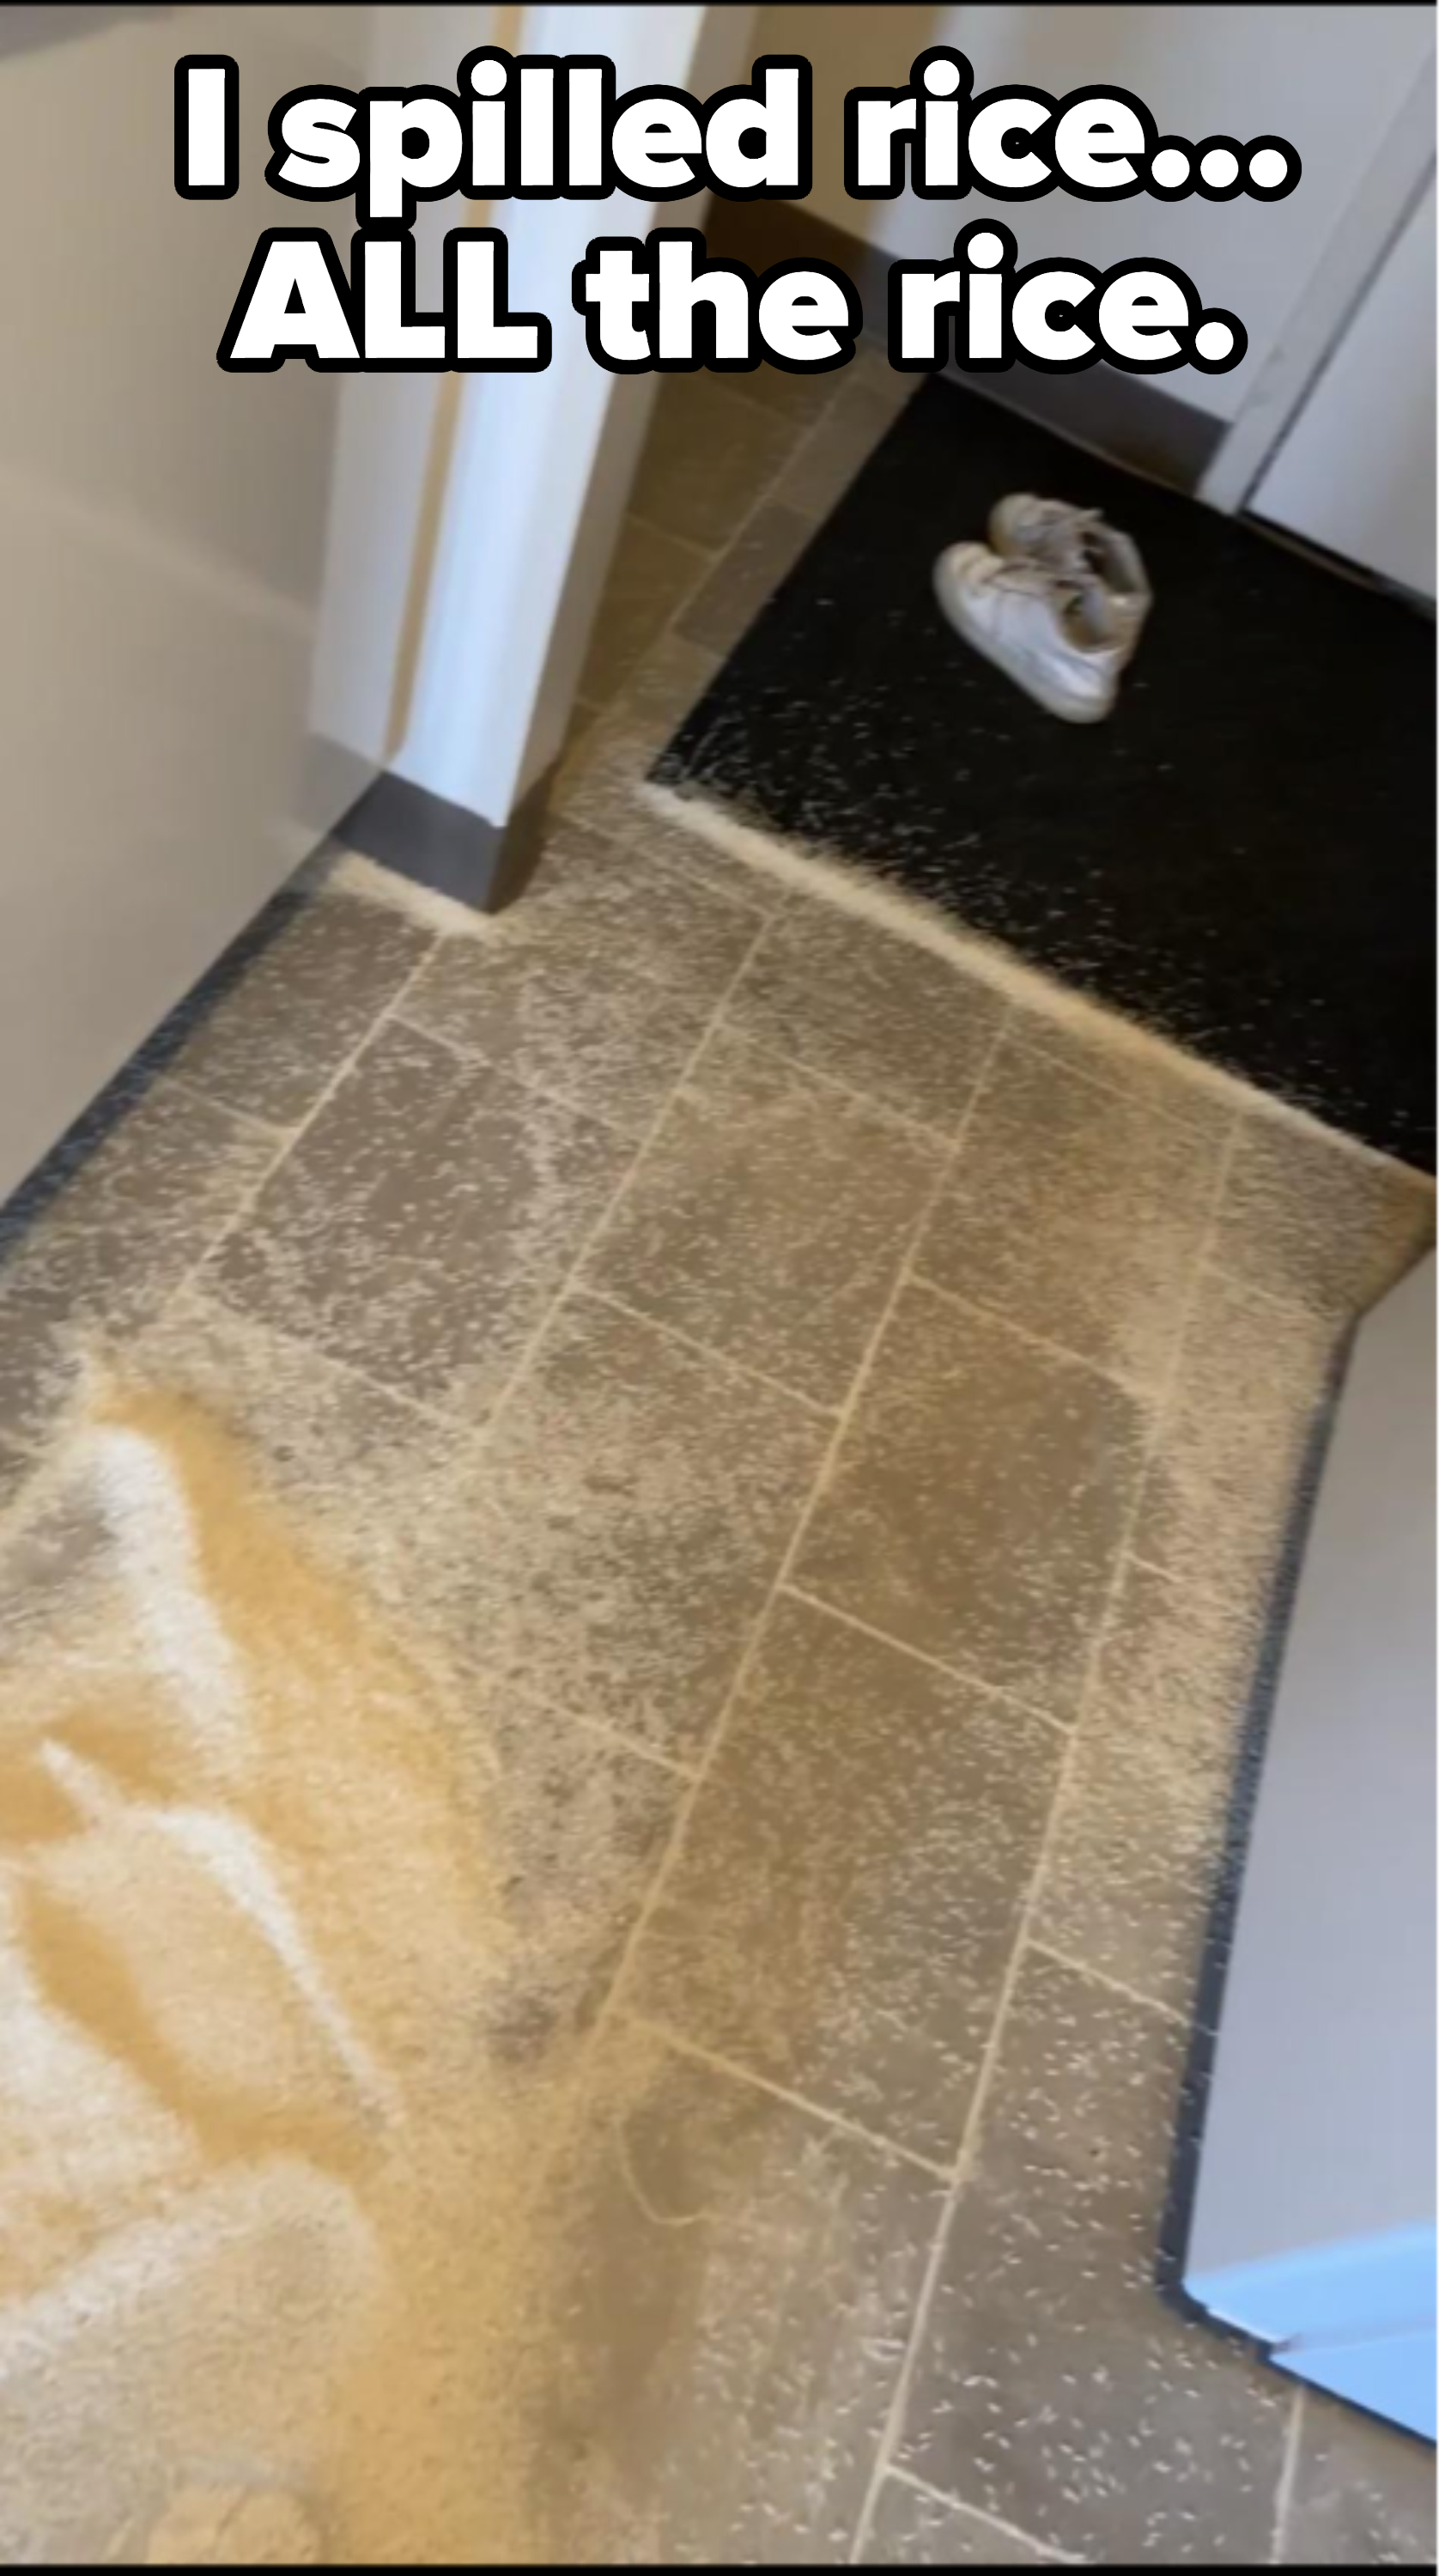 Rice spilled all over a tile floor, with caption, &quot;I spilled rice — ALL the rice&quot;